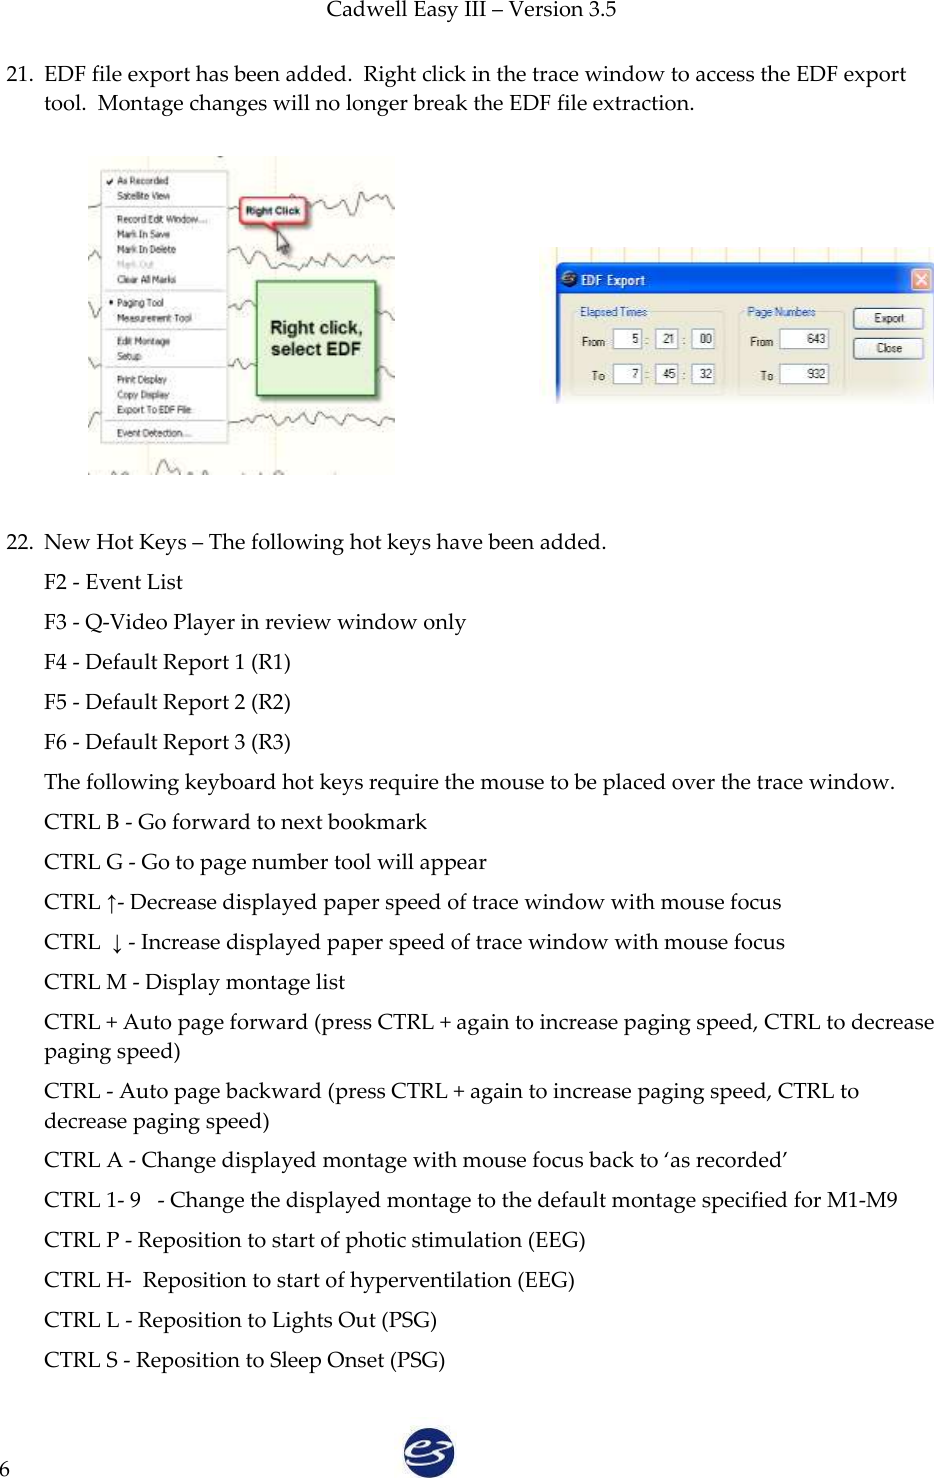 Cadwell Easy III – Version 3.5   6 21. EDF file export has been added.  Right click in the trace window to access the EDF export tool.  Montage changes will no longer break the EDF file extraction.             22. New Hot Keys – The following hot keys have been added. F2 - Event List F3 - Q-Video Player in review window only F4 - Default Report 1 (R1) F5 - Default Report 2 (R2) F6 - Default Report 3 (R3) The following keyboard hot keys require the mouse to be placed over the trace window. CTRL B - Go forward to next bookmark CTRL G - Go to page number tool will appear CTRL ↑- Decrease displayed paper speed of trace window with mouse focus CTRL  ↓ - Increase displayed paper speed of trace window with mouse focus CTRL M - Display montage list CTRL + Auto page forward (press CTRL + again to increase paging speed, CTRL to decrease paging speed) CTRL - Auto page backward (press CTRL + again to increase paging speed, CTRL to decrease paging speed) CTRL A - Change displayed montage with mouse focus back to ‘as recorded’ CTRL 1- 9   - Change the displayed montage to the default montage specified for M1-M9 CTRL P - Reposition to start of photic stimulation (EEG) CTRL H-  Reposition to start of hyperventilation (EEG) CTRL L - Reposition to Lights Out (PSG) CTRL S - Reposition to Sleep Onset (PSG) 